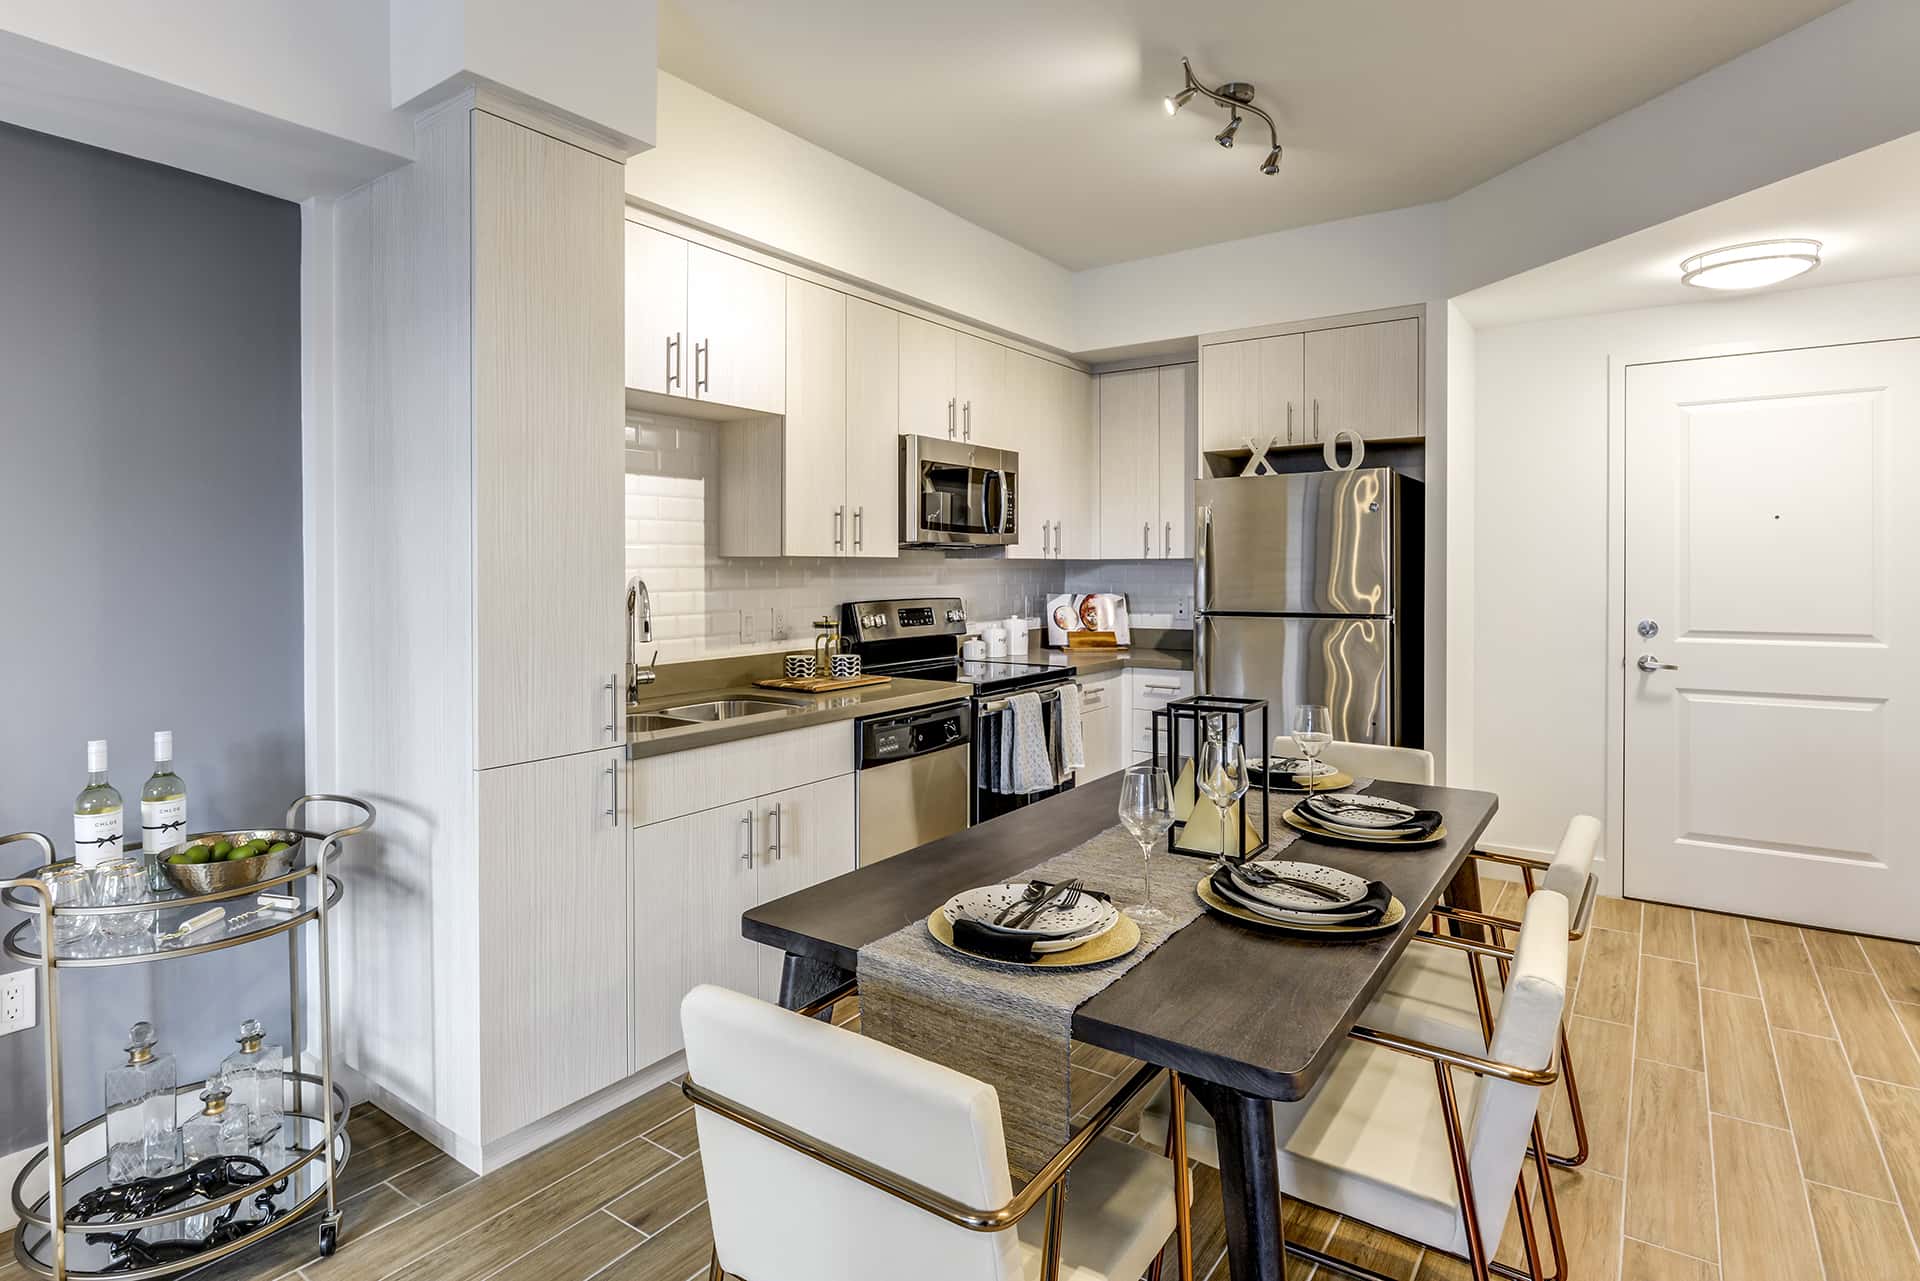 Apartments for Rent in North Miami Beach, FL - Lazul Kitchen with Stainless Steel Appliances, Stylish Decor, and Modern Wood Cabinets